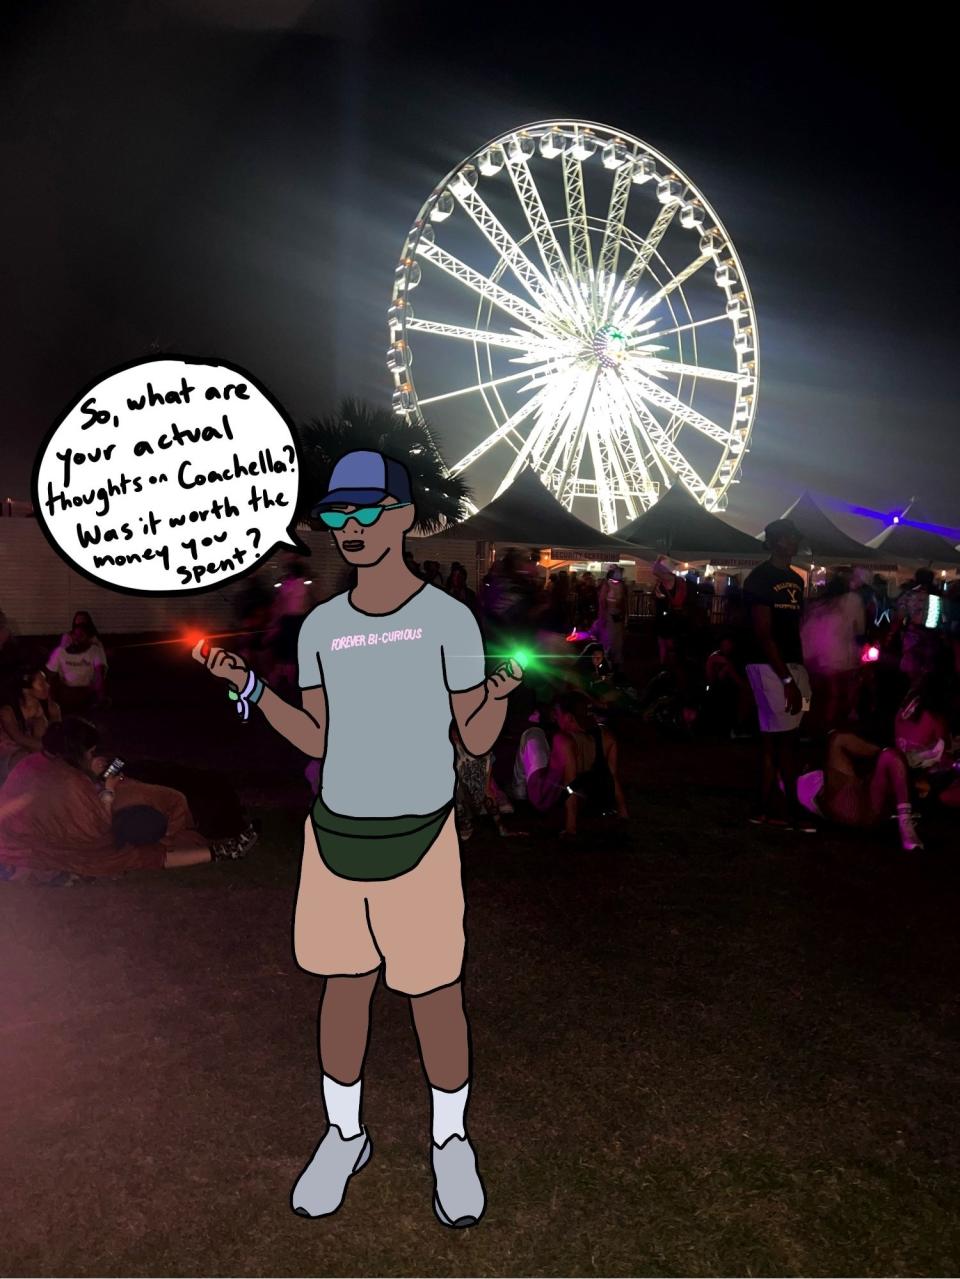 Pernell, the author, illustrated in front of the famous Coachella ferris wheel with a speech bubble saying "So, what are your actual thoughts on Coachella? Was it worth the money you spent?"